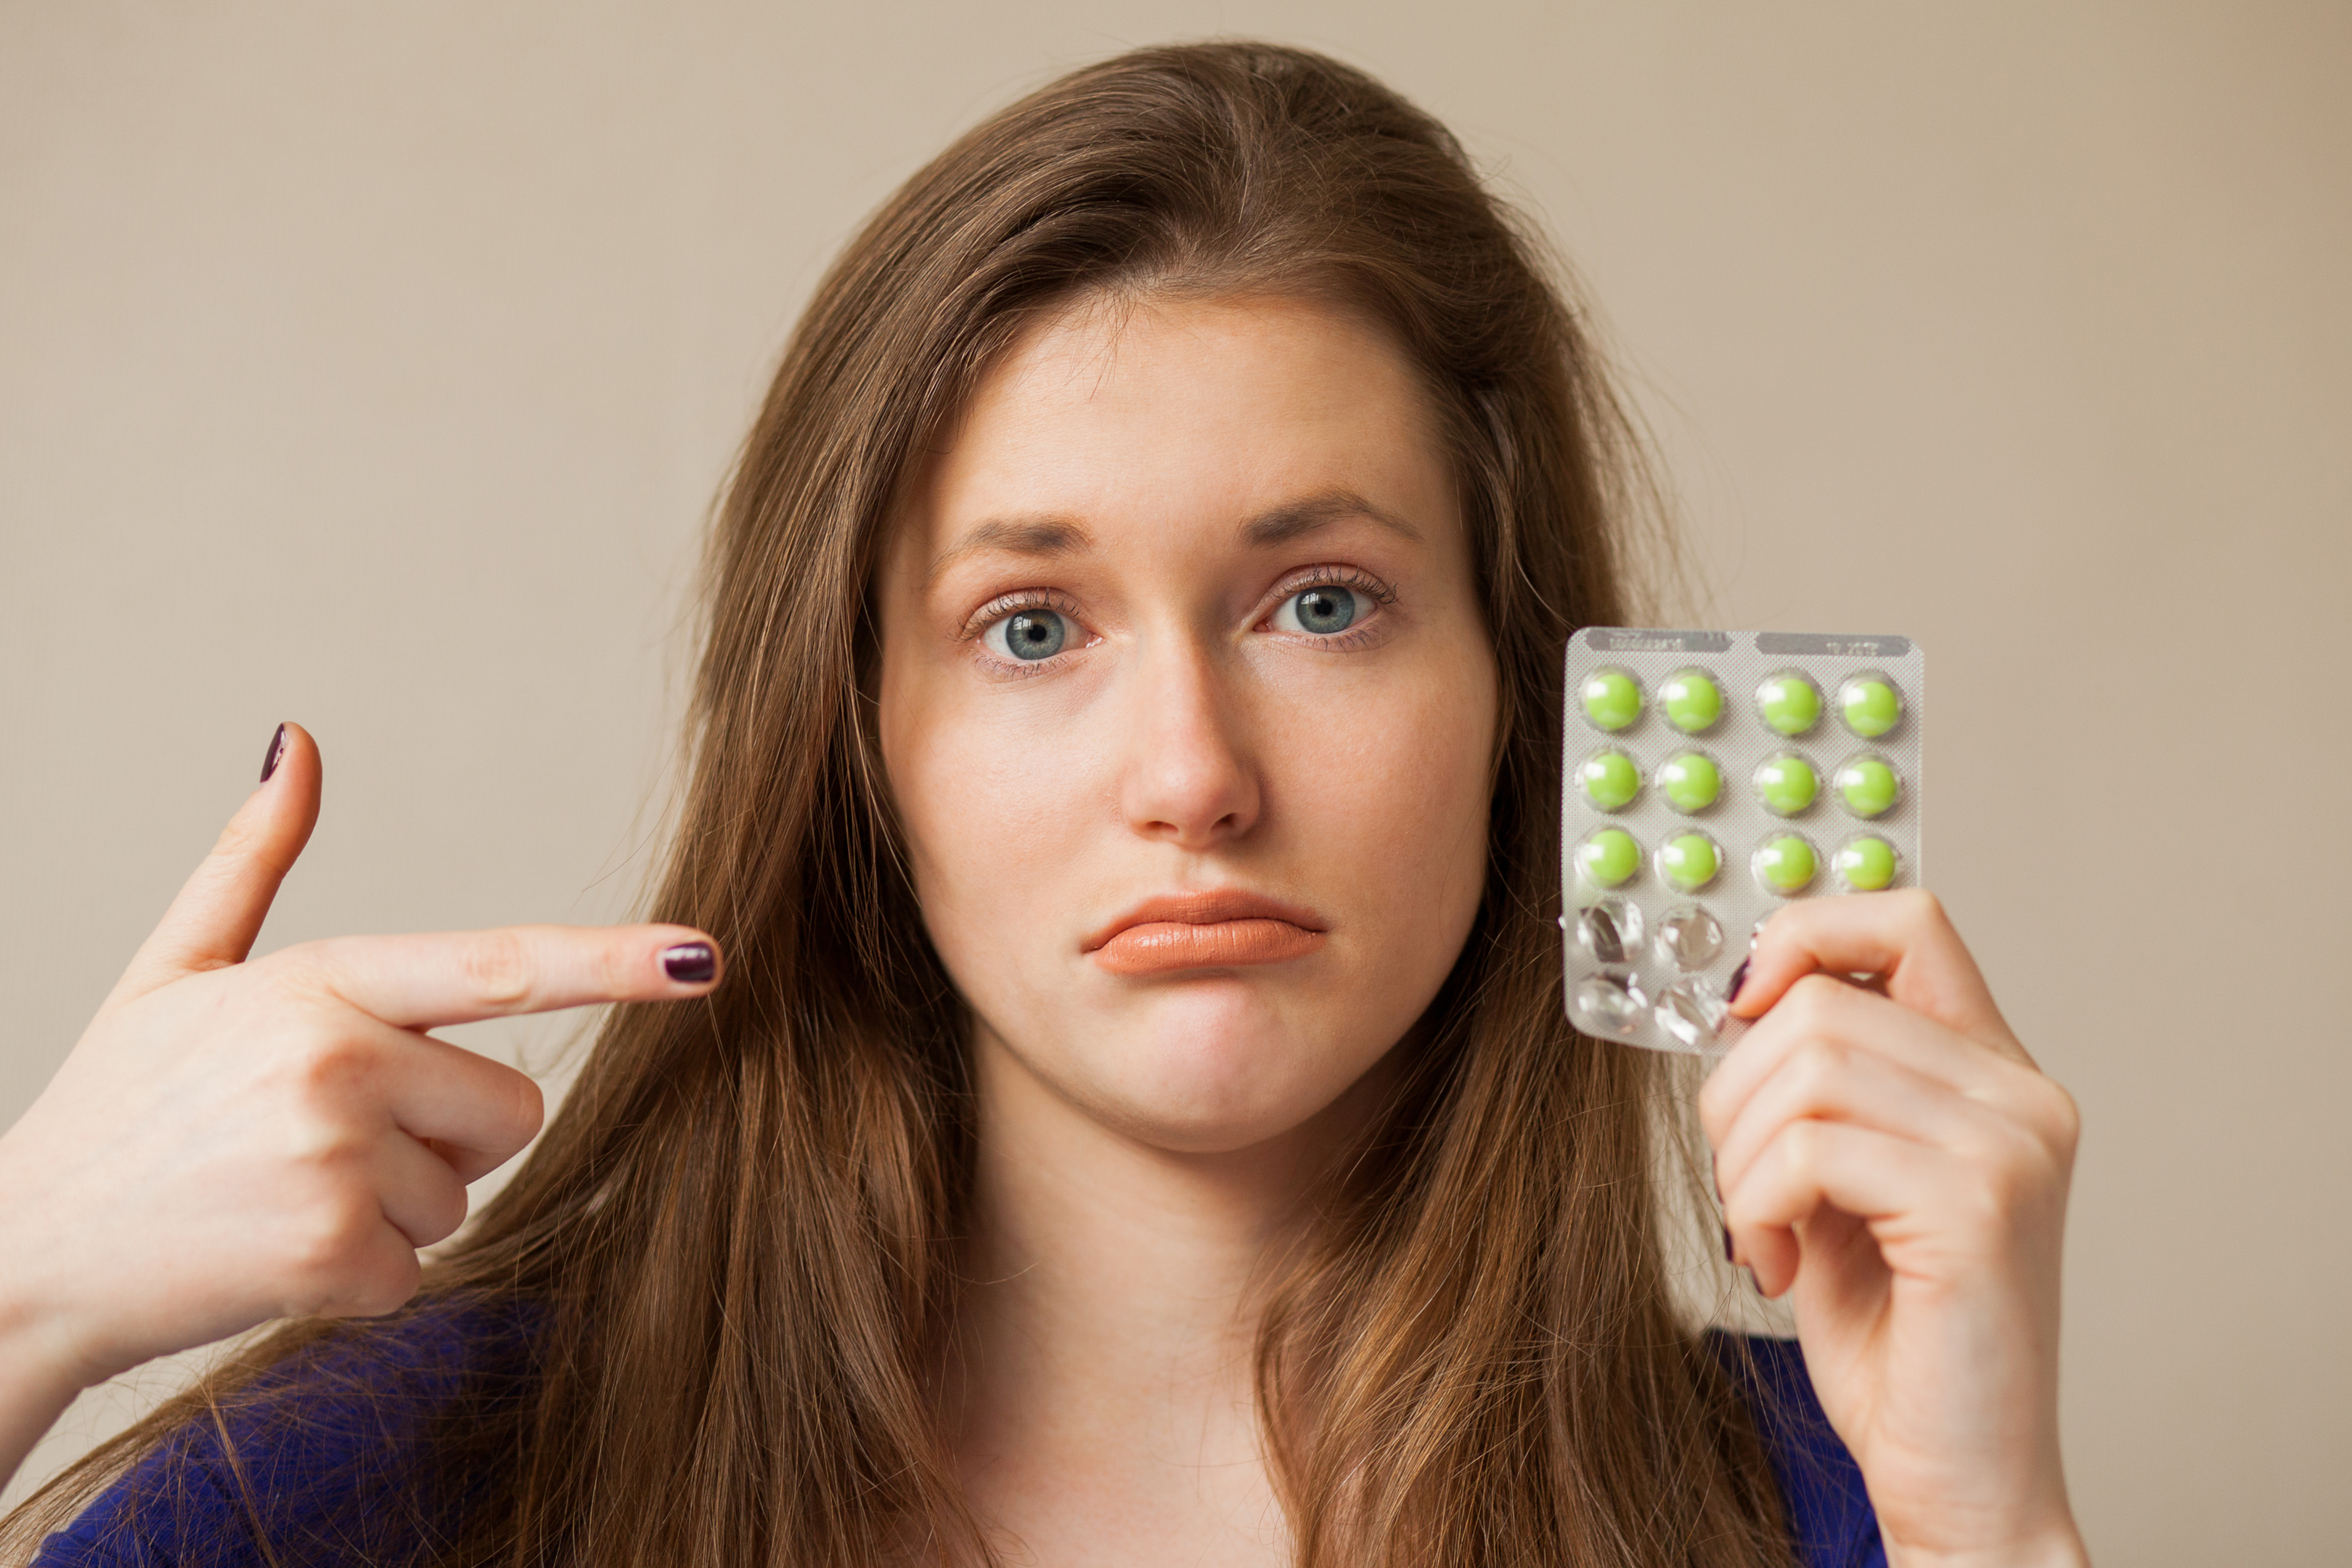 Sometimes, emergency contraception is the only option.